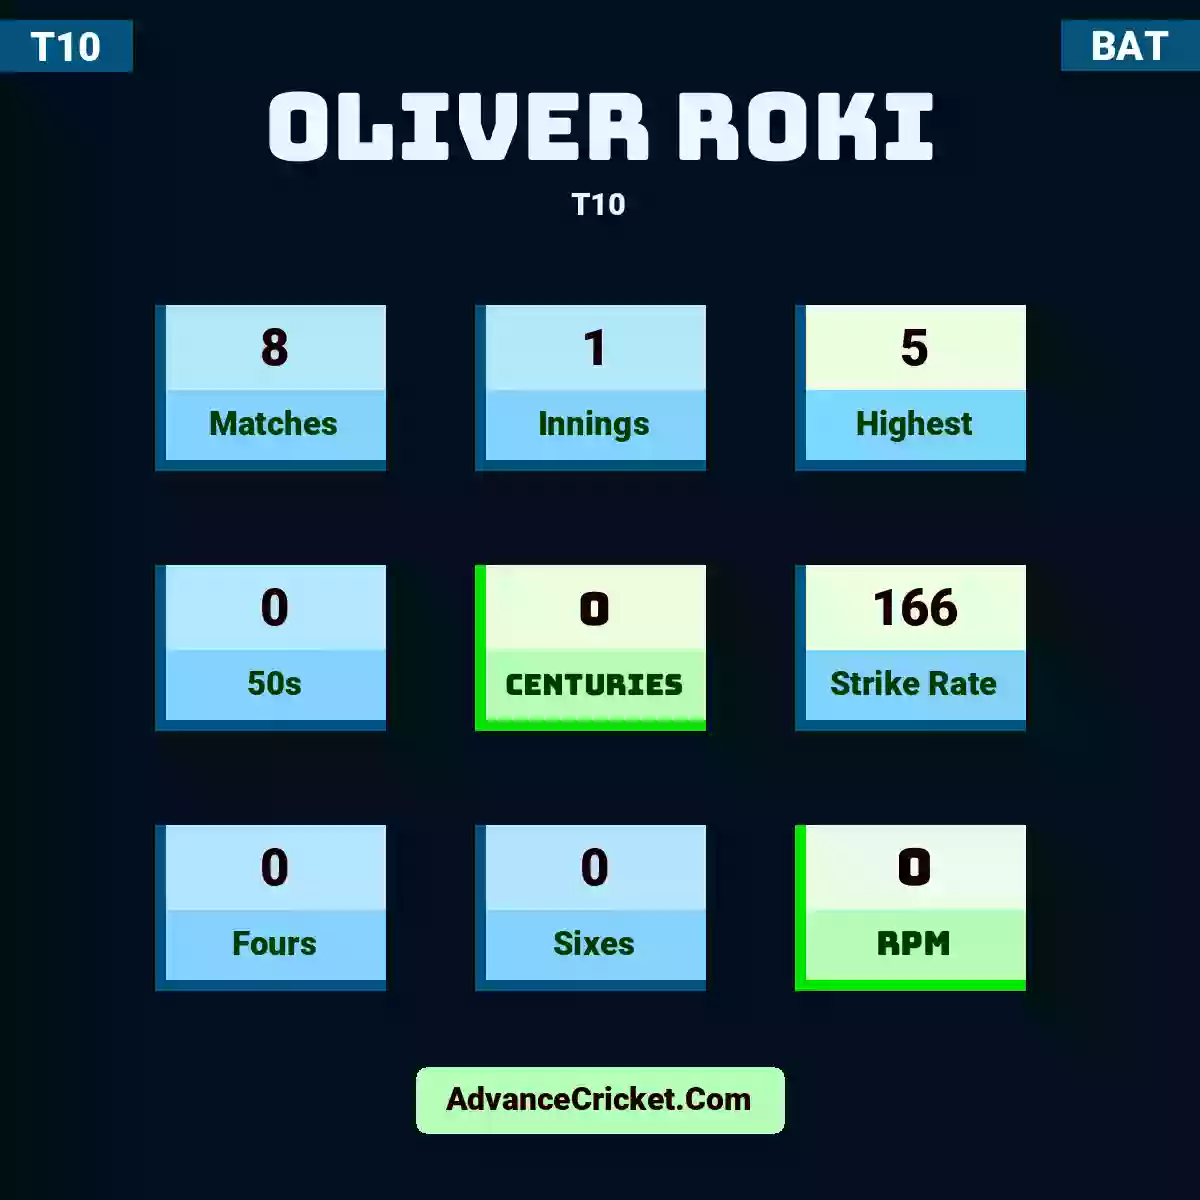 Oliver Roki T10 , Oliver Roki played 8 matches, scored 5 runs as highest, 0 half-centuries, and 0 centuries, with a strike rate of 166. O.Roki hit 0 fours and 0 sixes, with an RPM of 0.